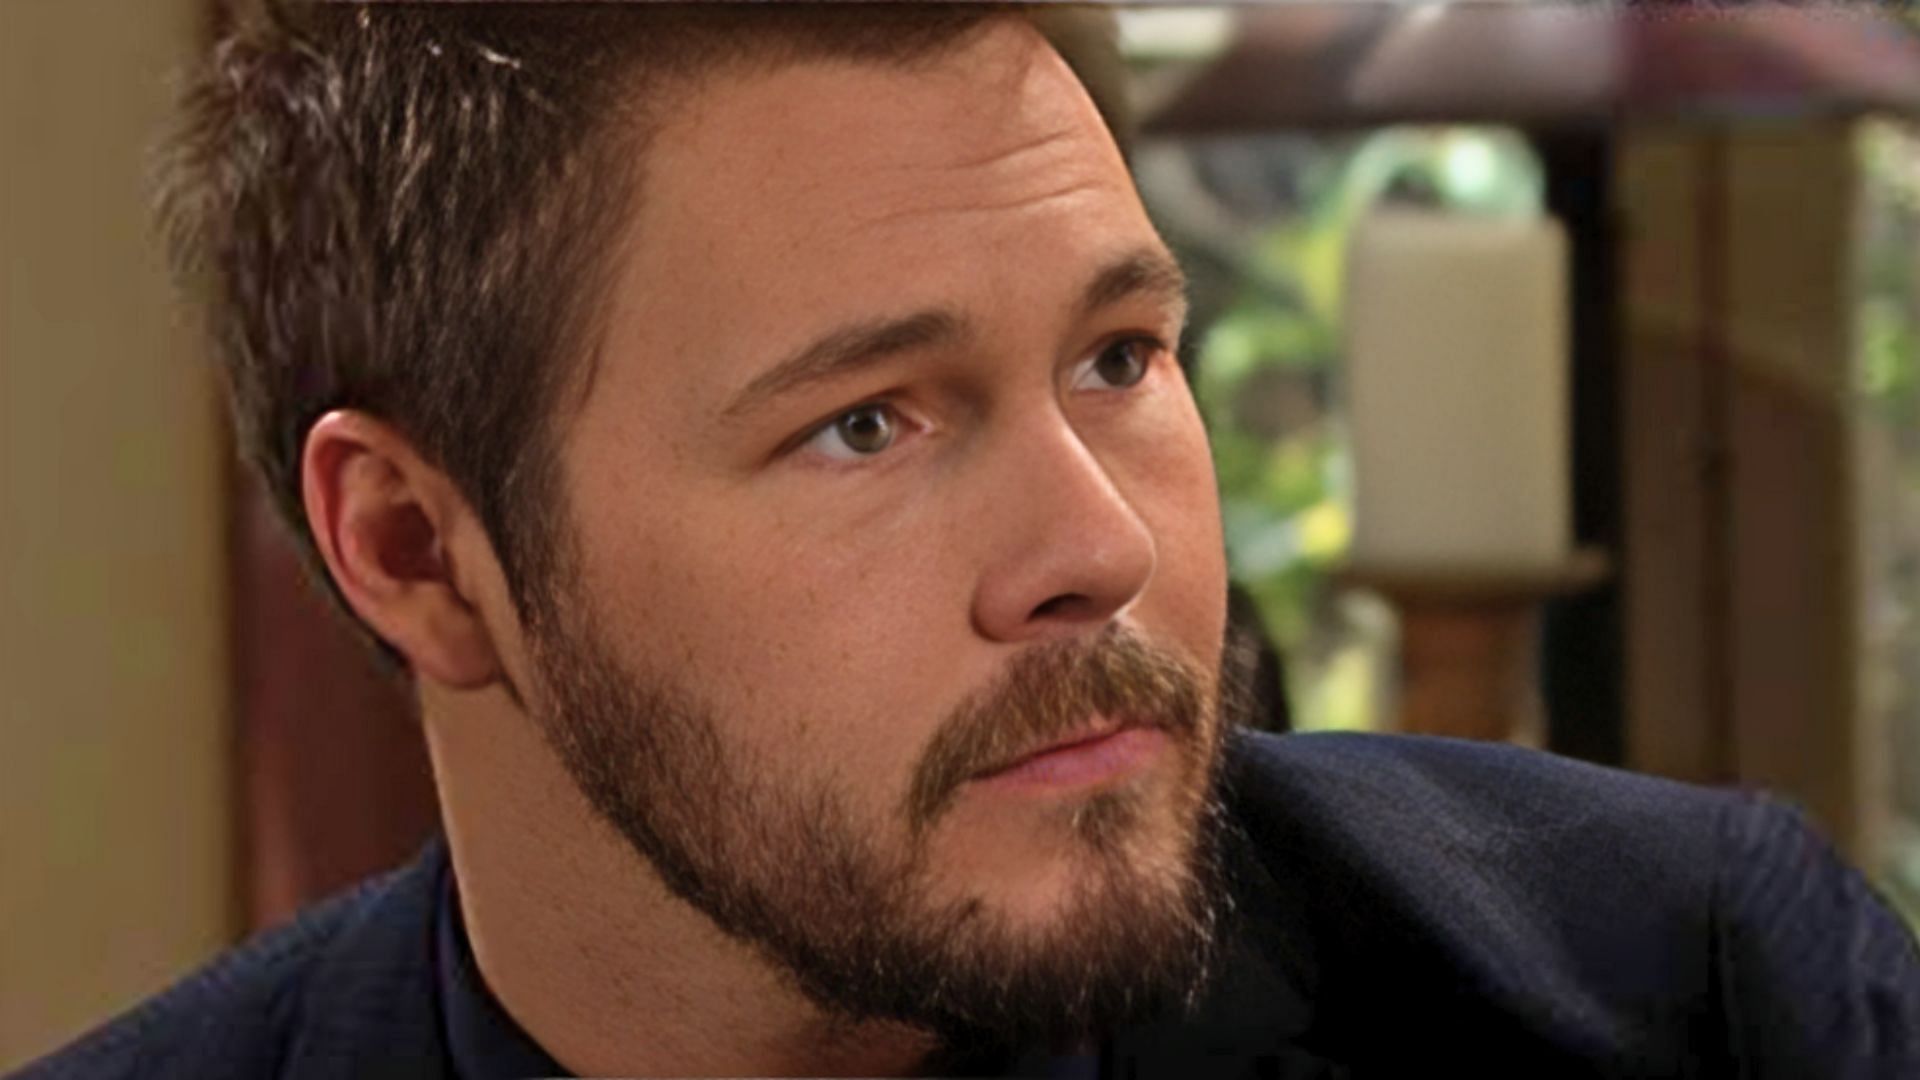 A still of Liam from the soap opera. (Image via CBS)